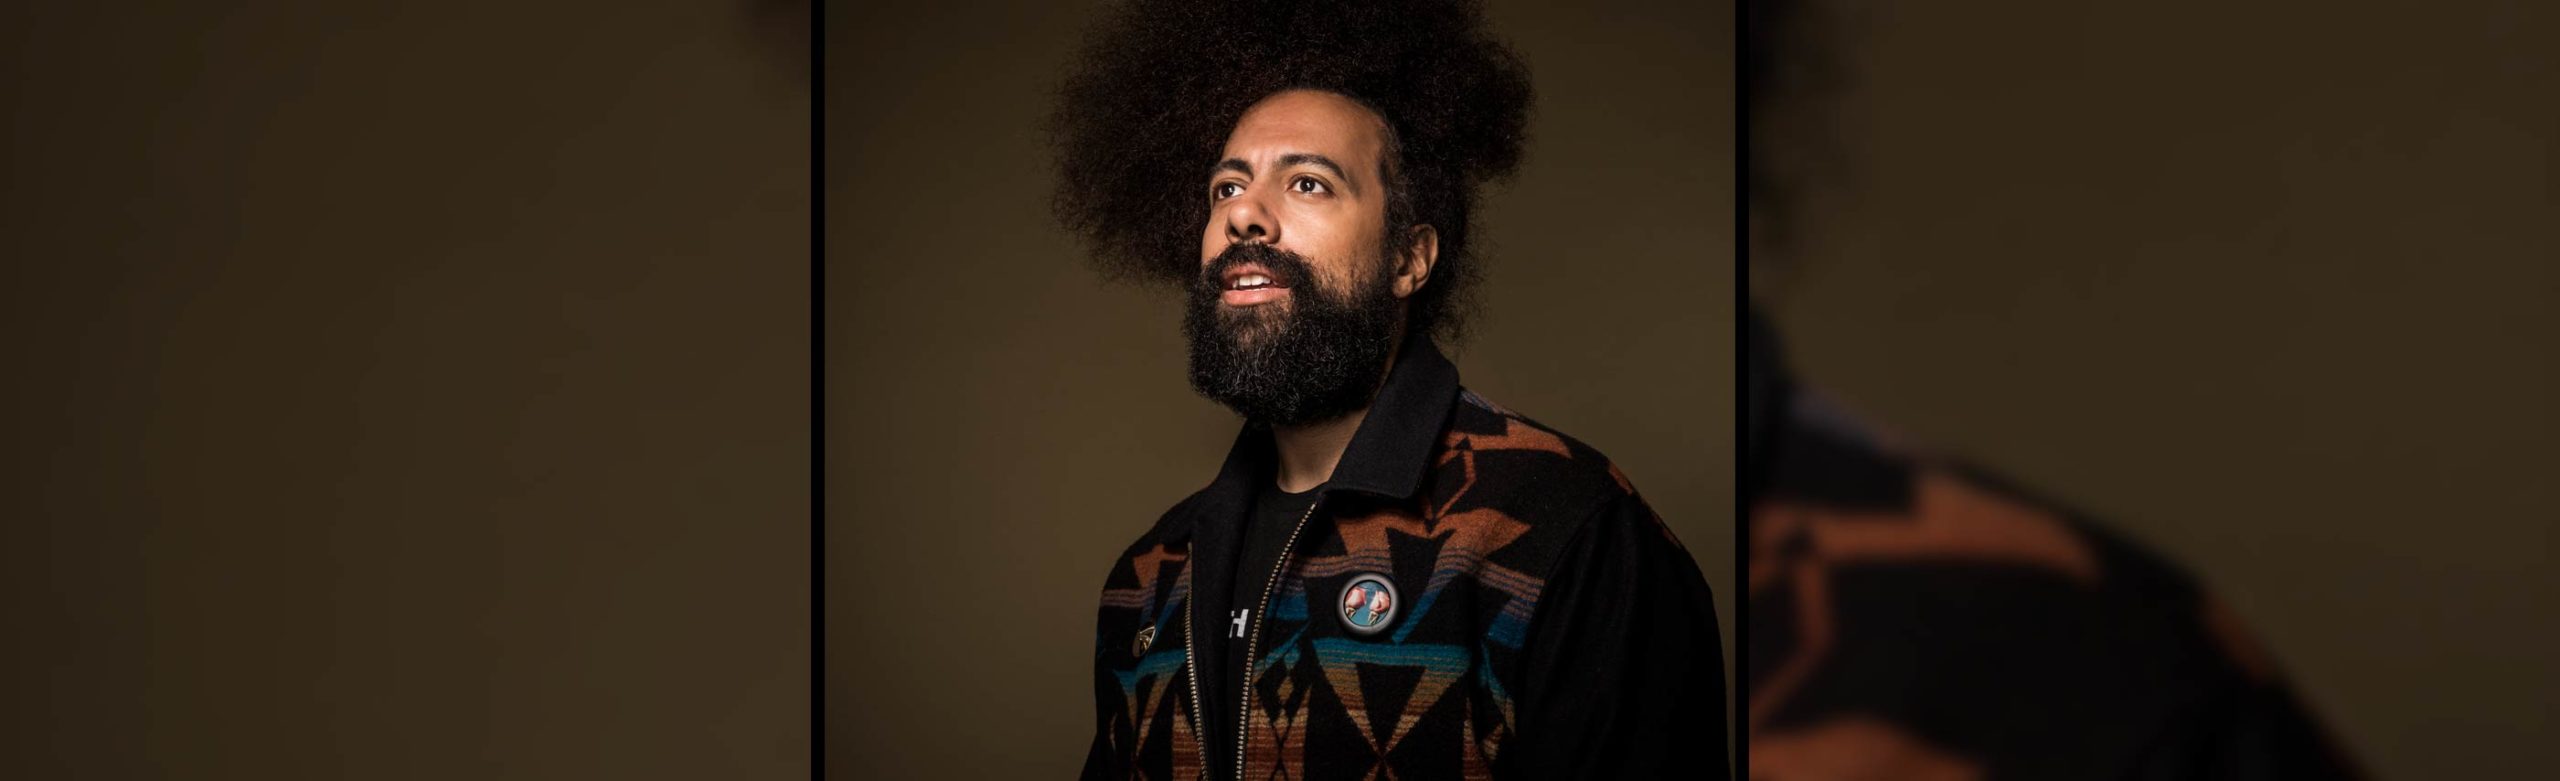 Win Tickets to Reggie Watts in Montana at The ELM or The Wilma Image